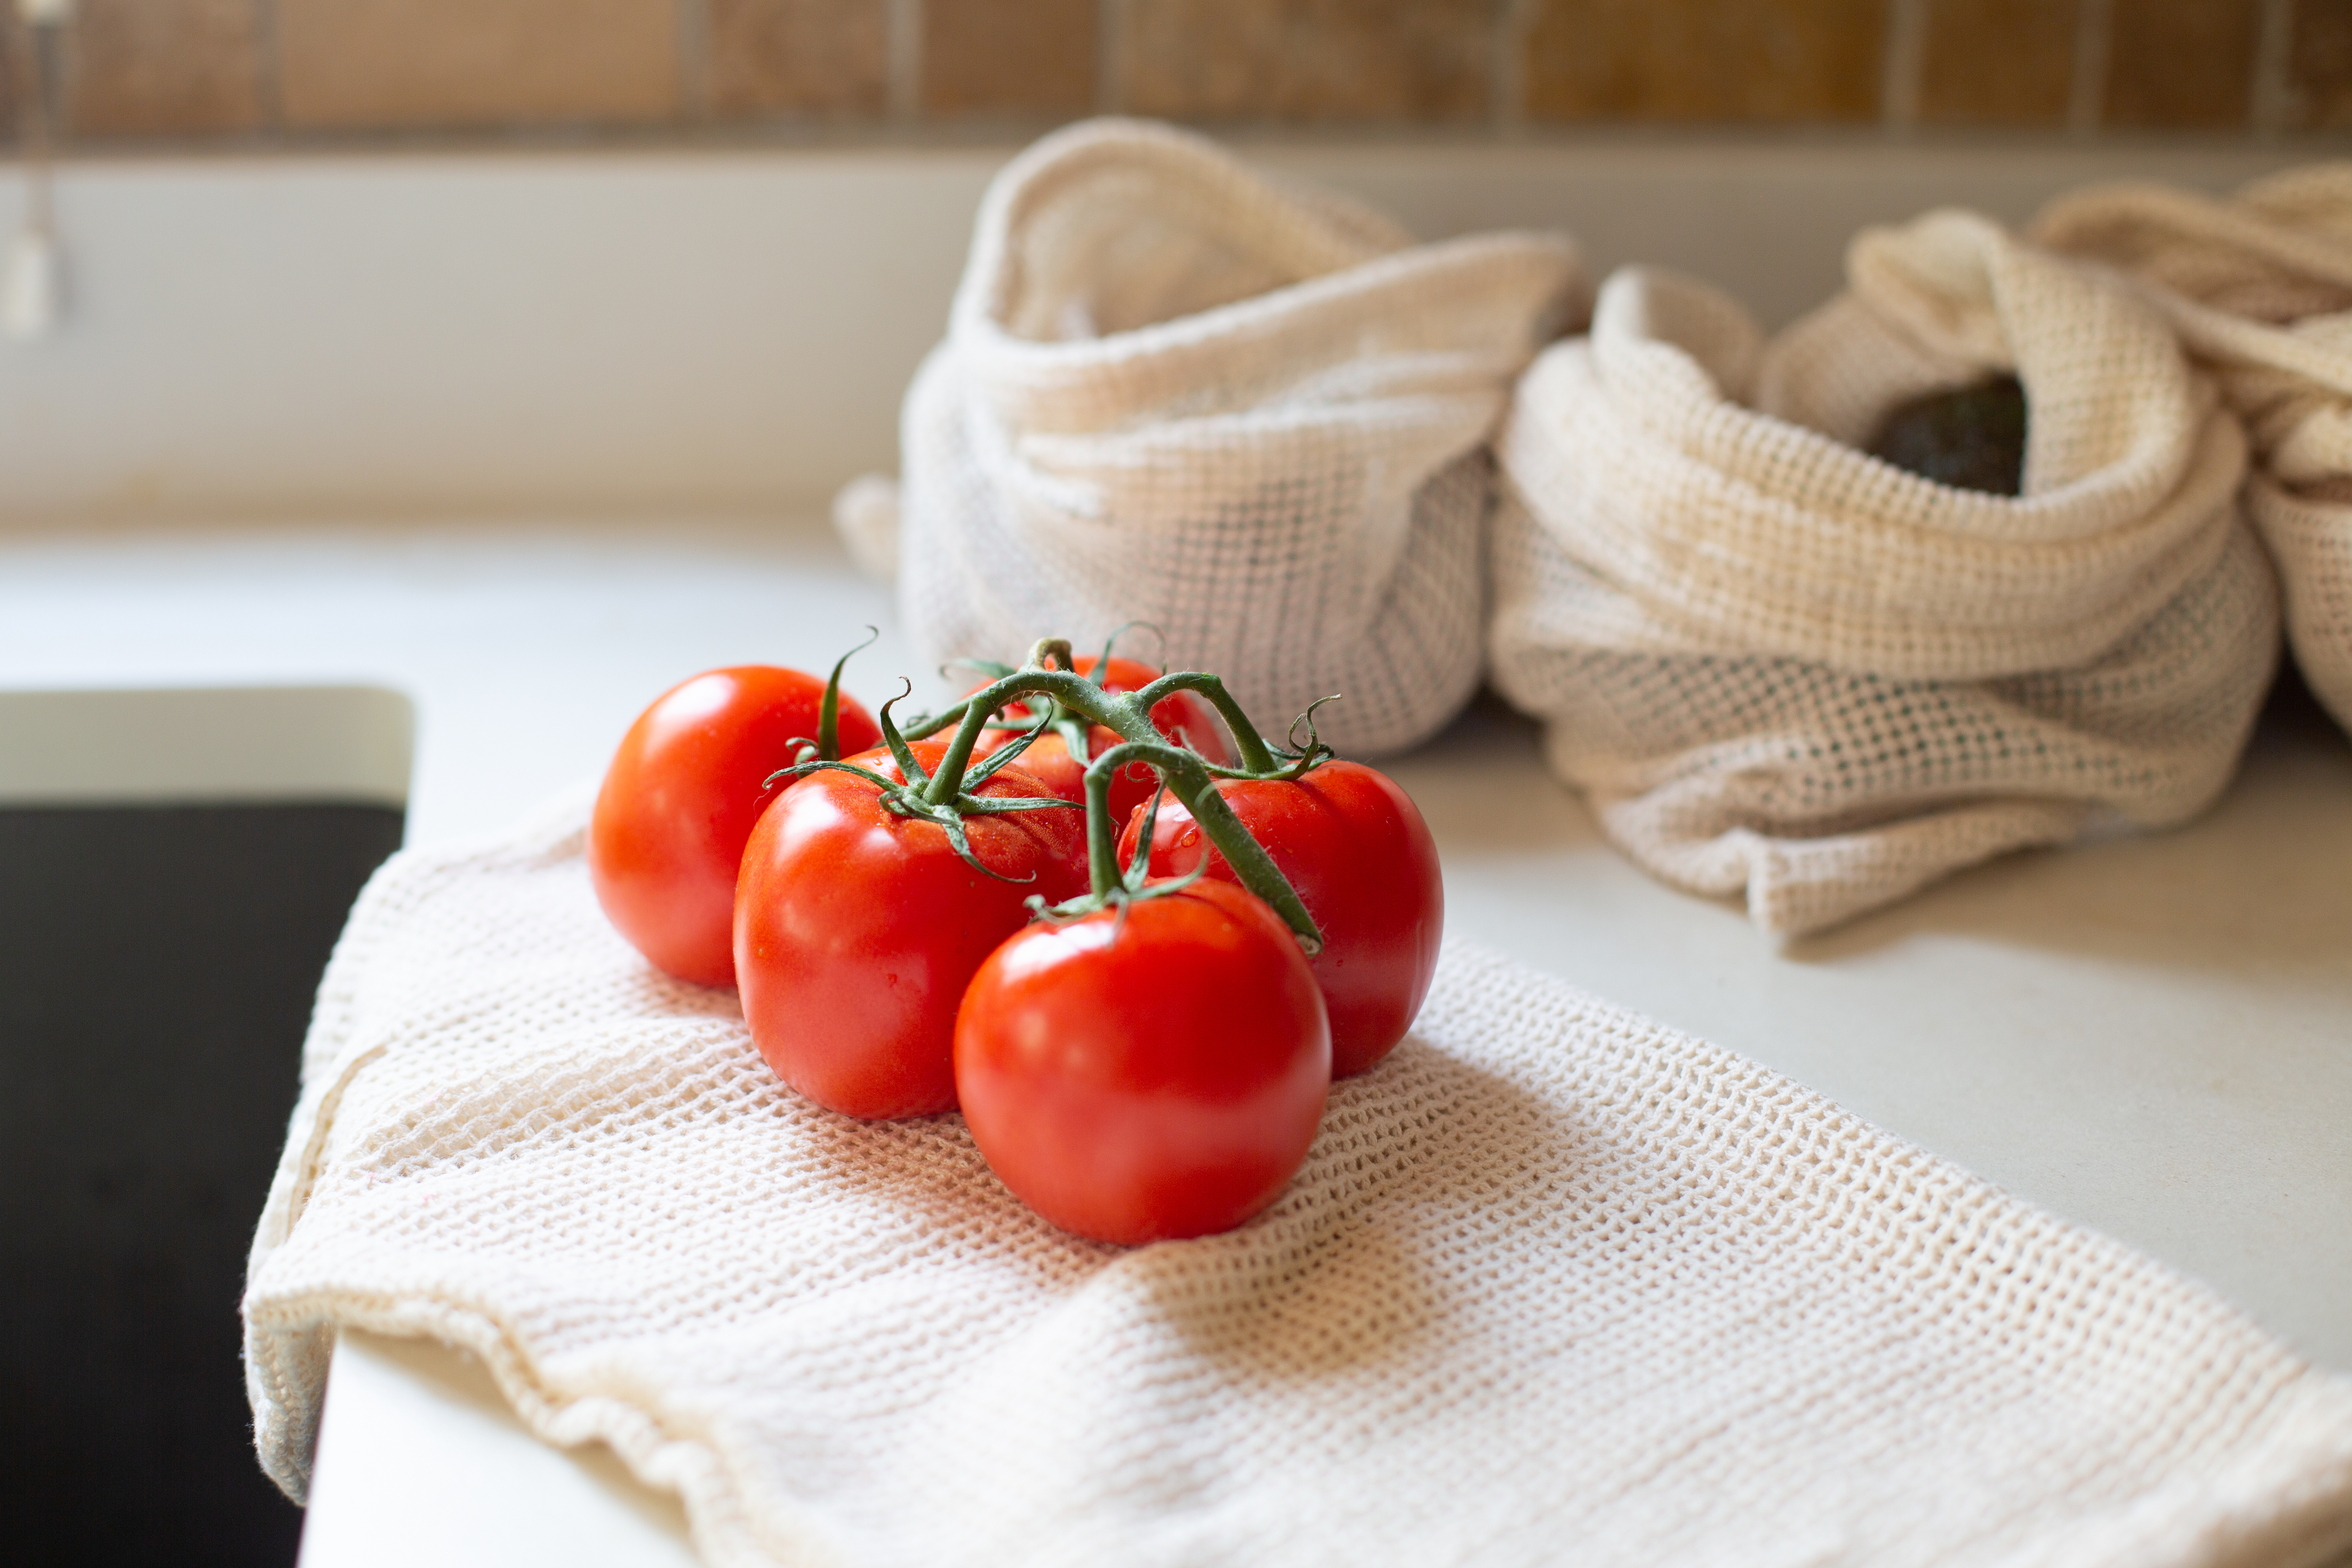 A cluster of ripe tomatoes on a kitchen counter with a white cloth